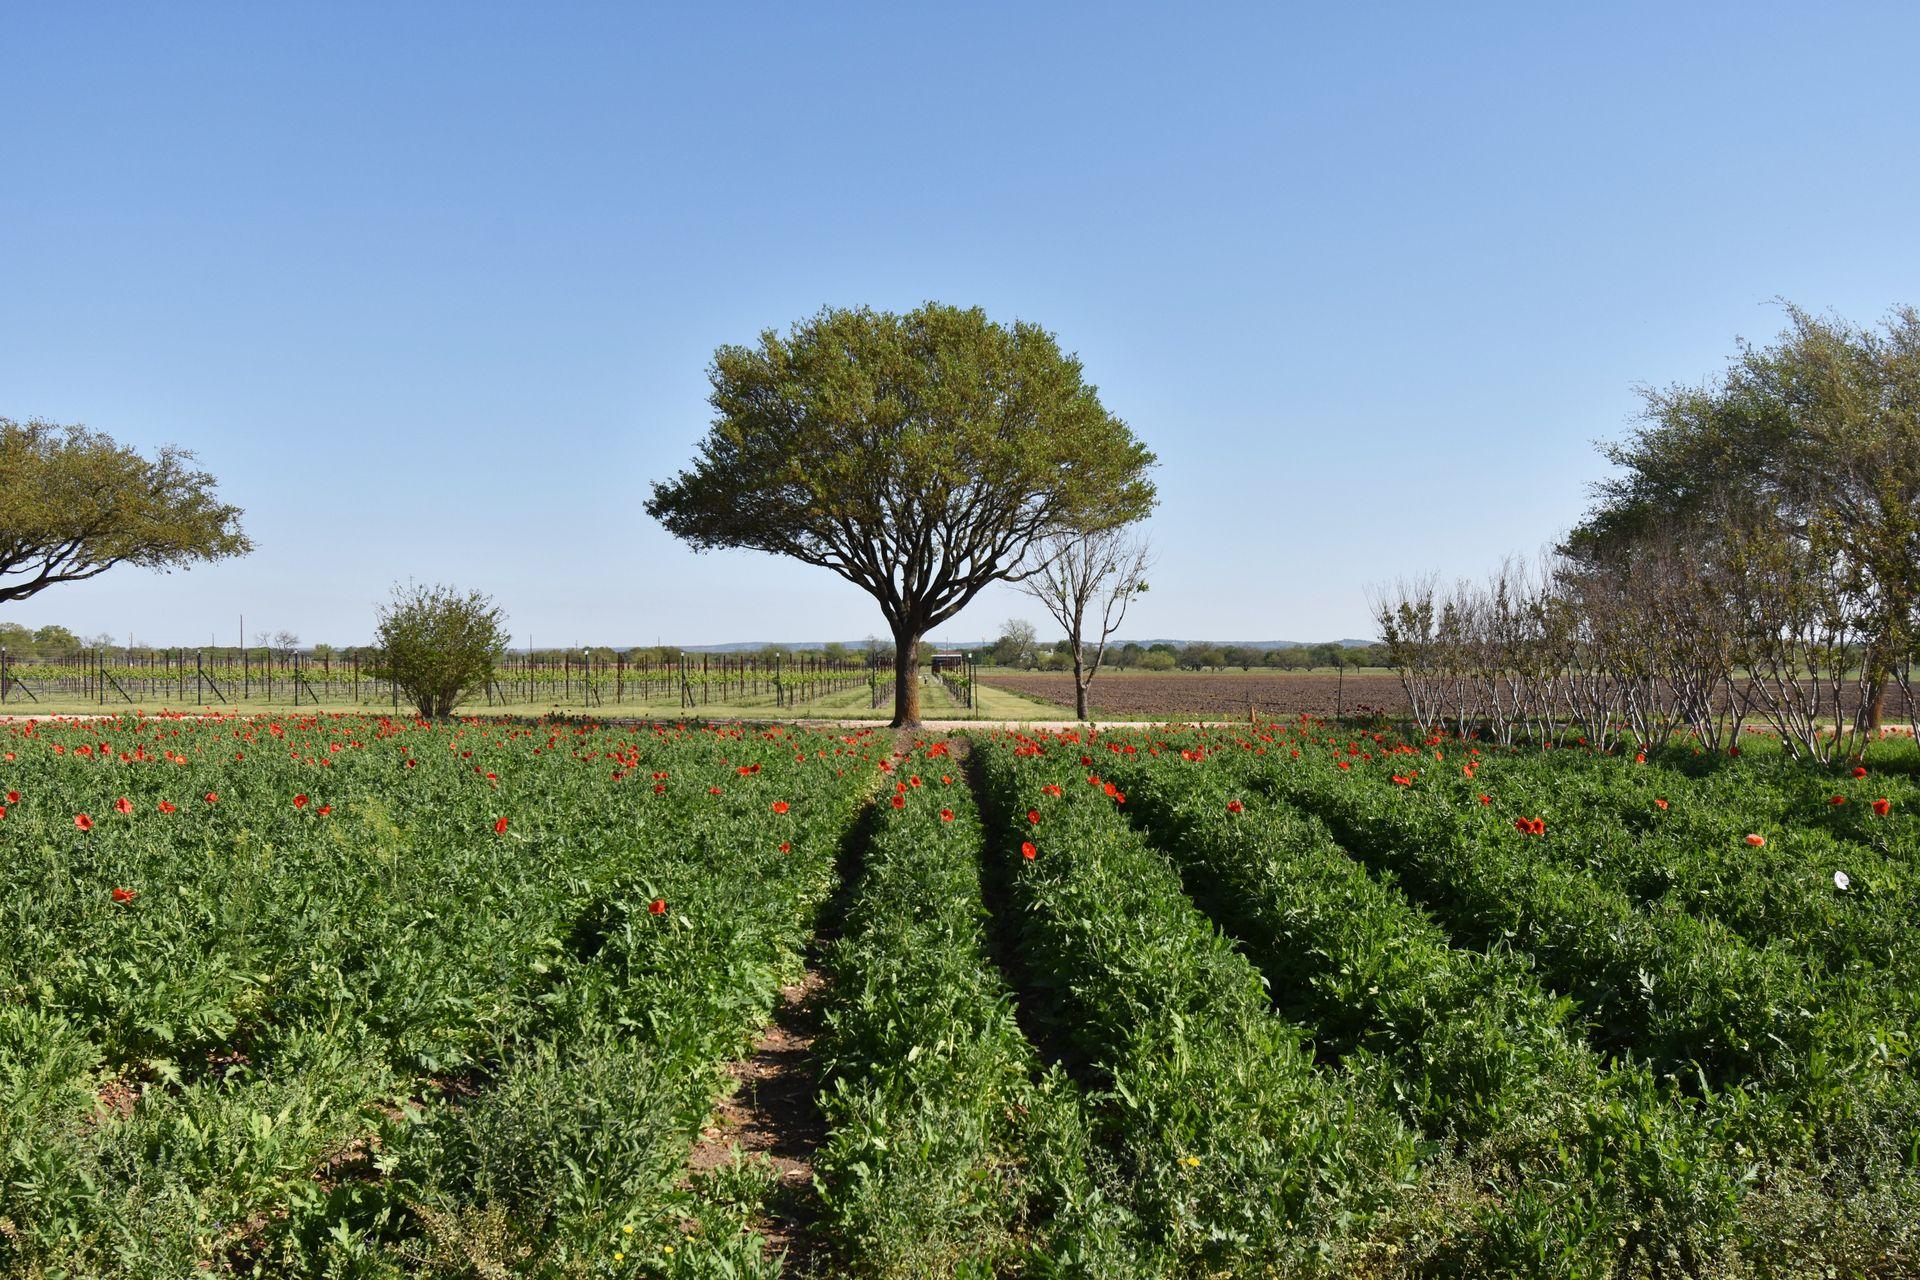 Parallel Rows of green plants and few red roses. A tree is centered and directly across from the rows of greenery.